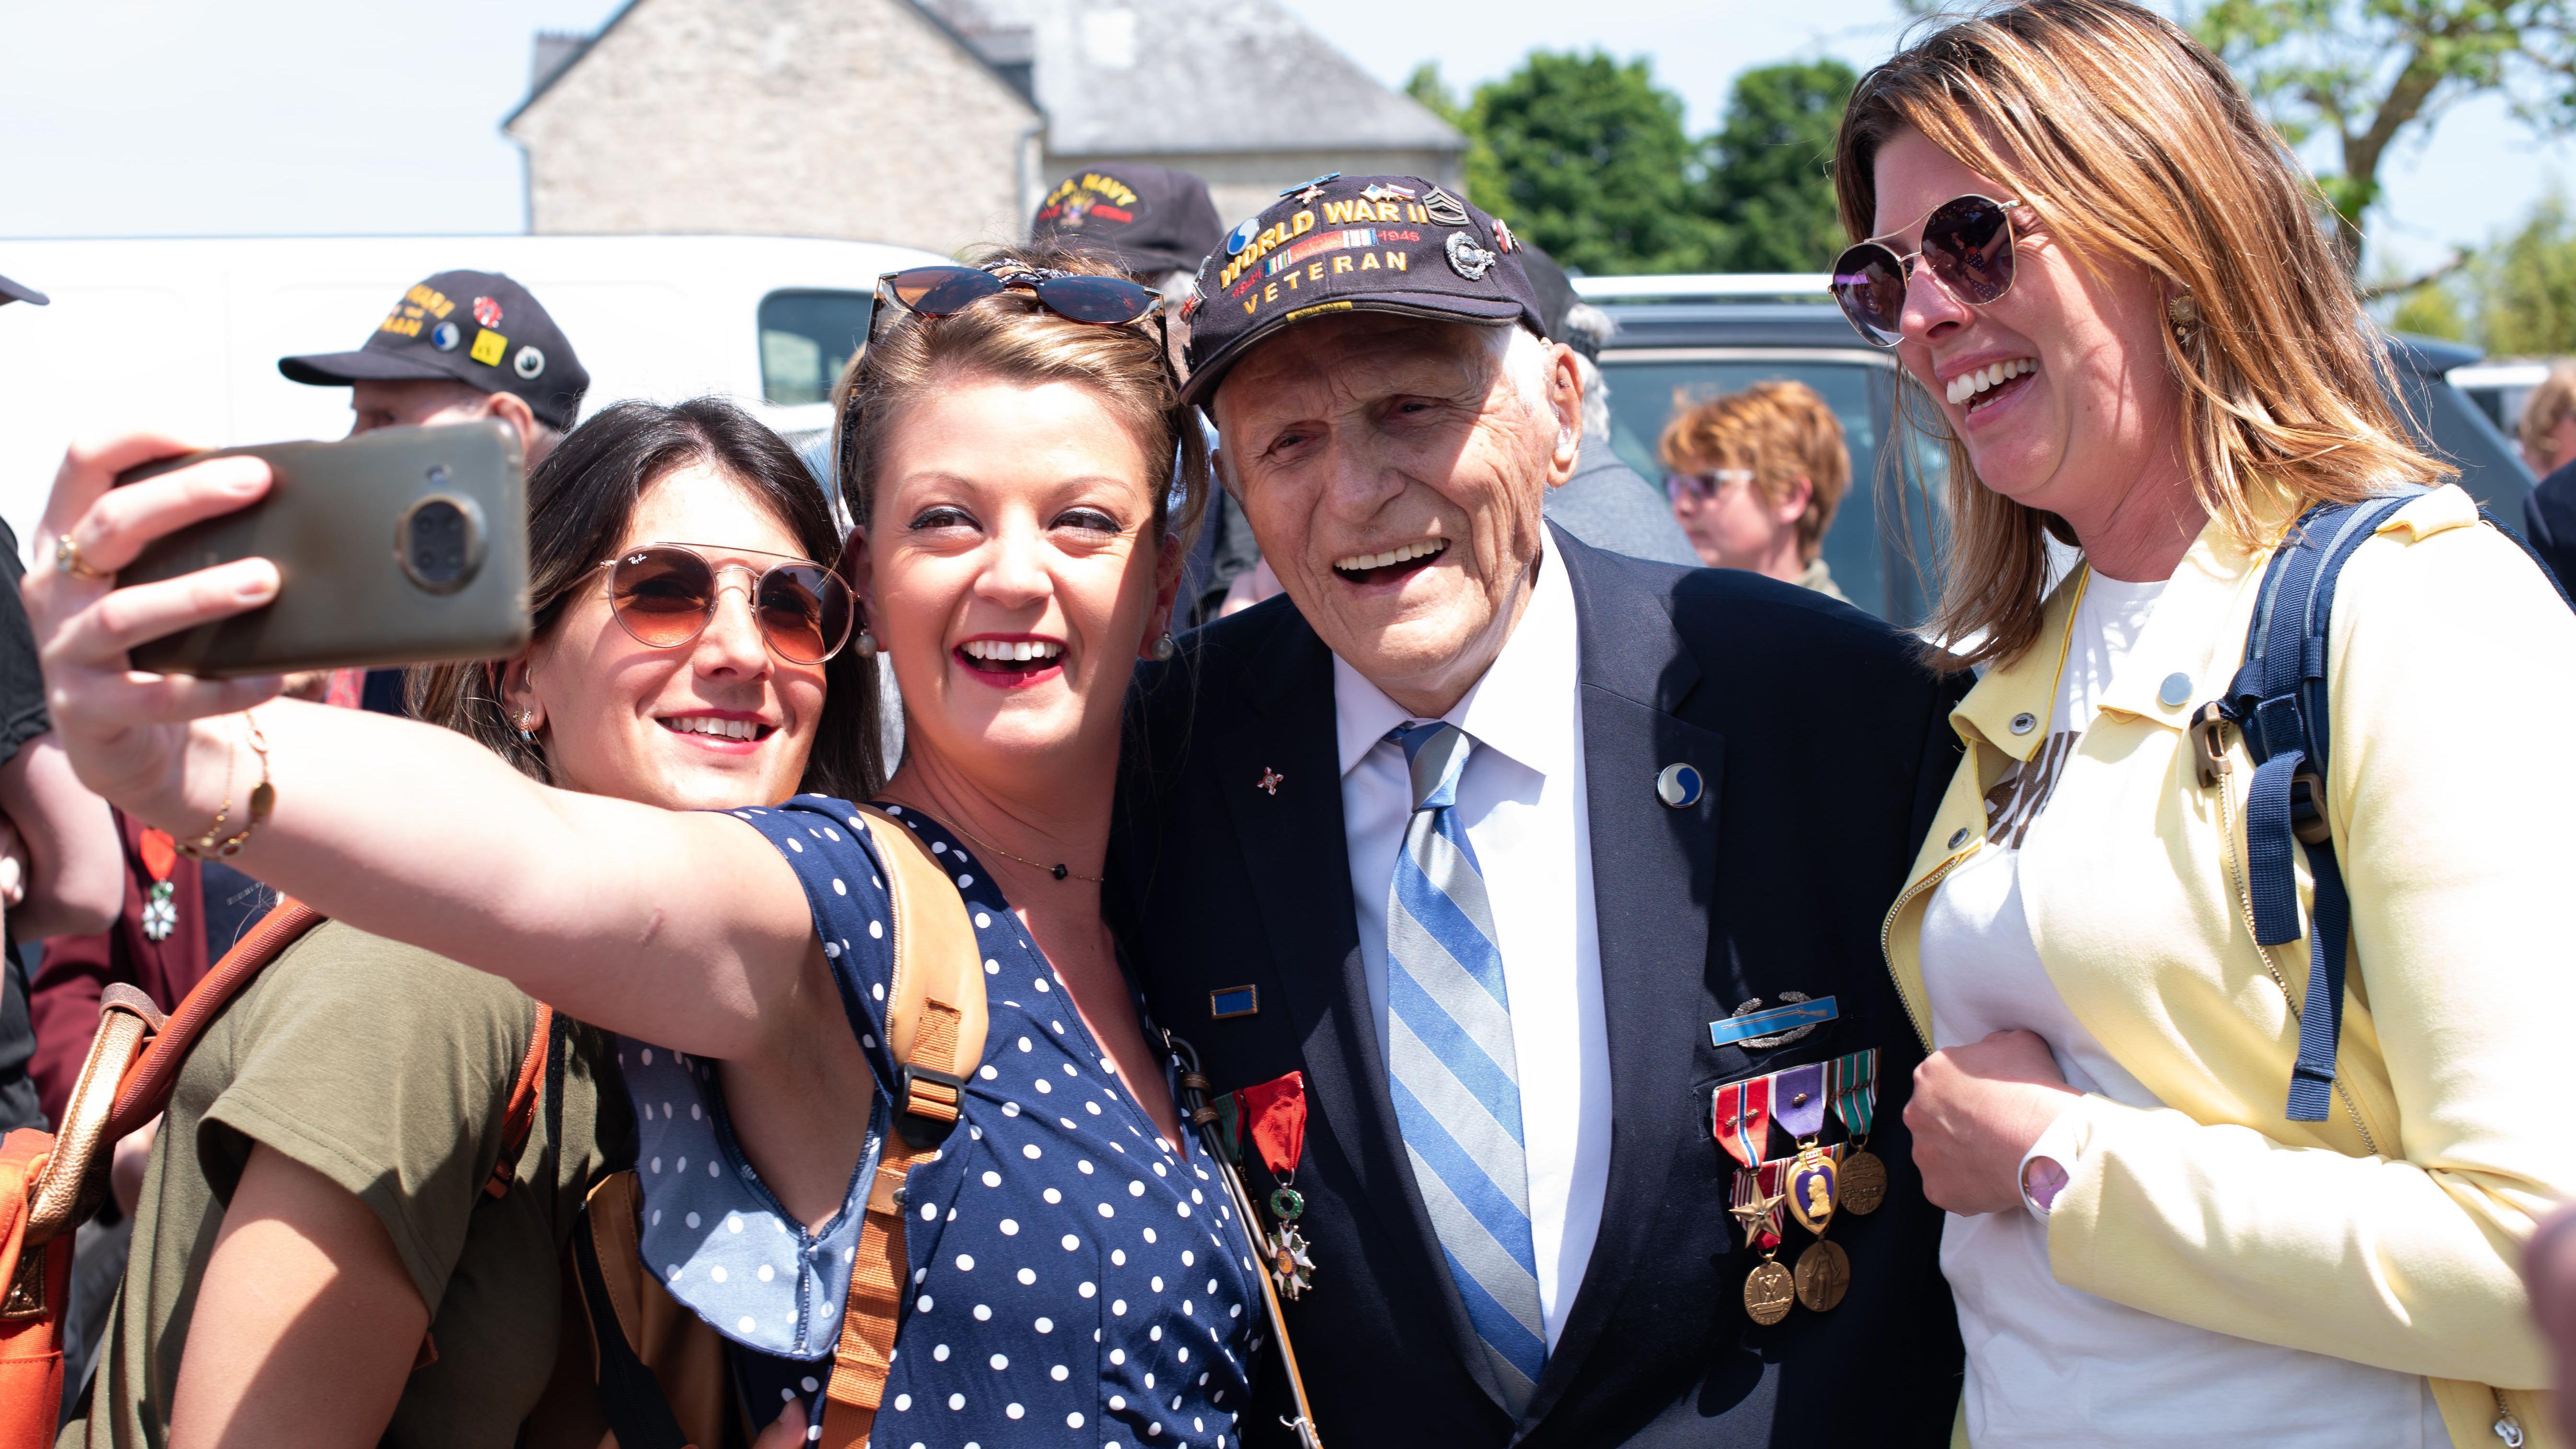 They gave us our freedom - Veterans celebrated in Normandy 